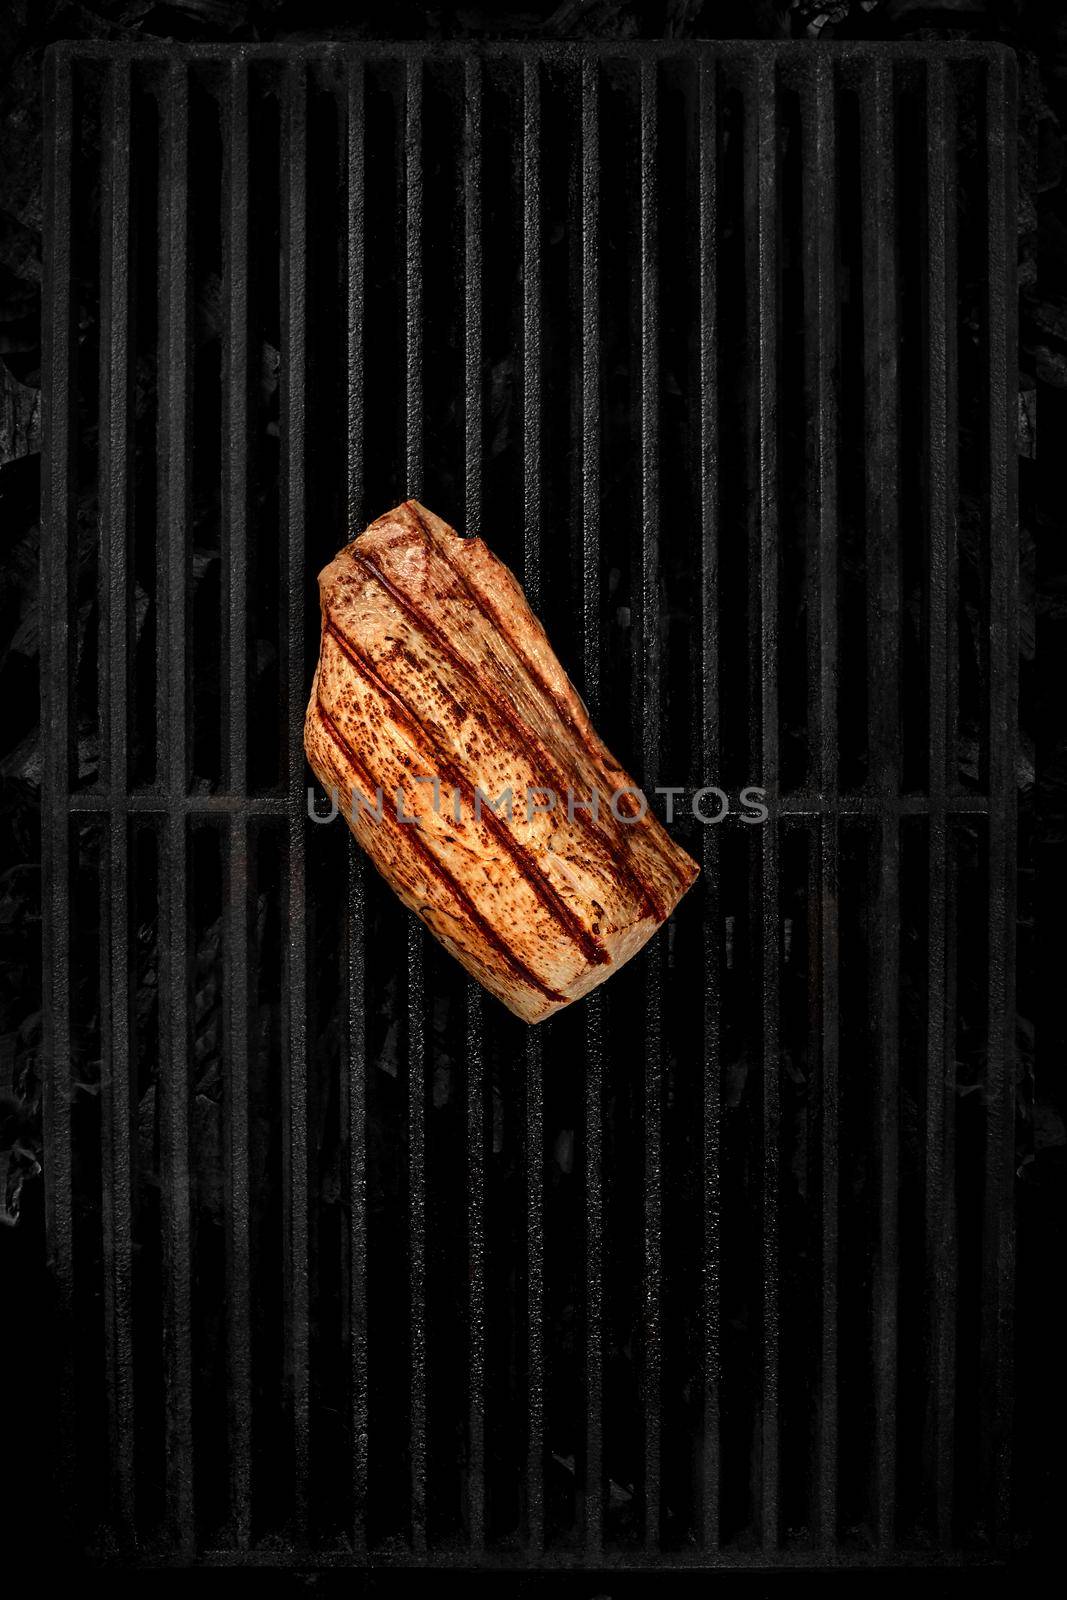 Grilled veal tenderloin on black cast iron grill grate over cold coals by nazarovsergey